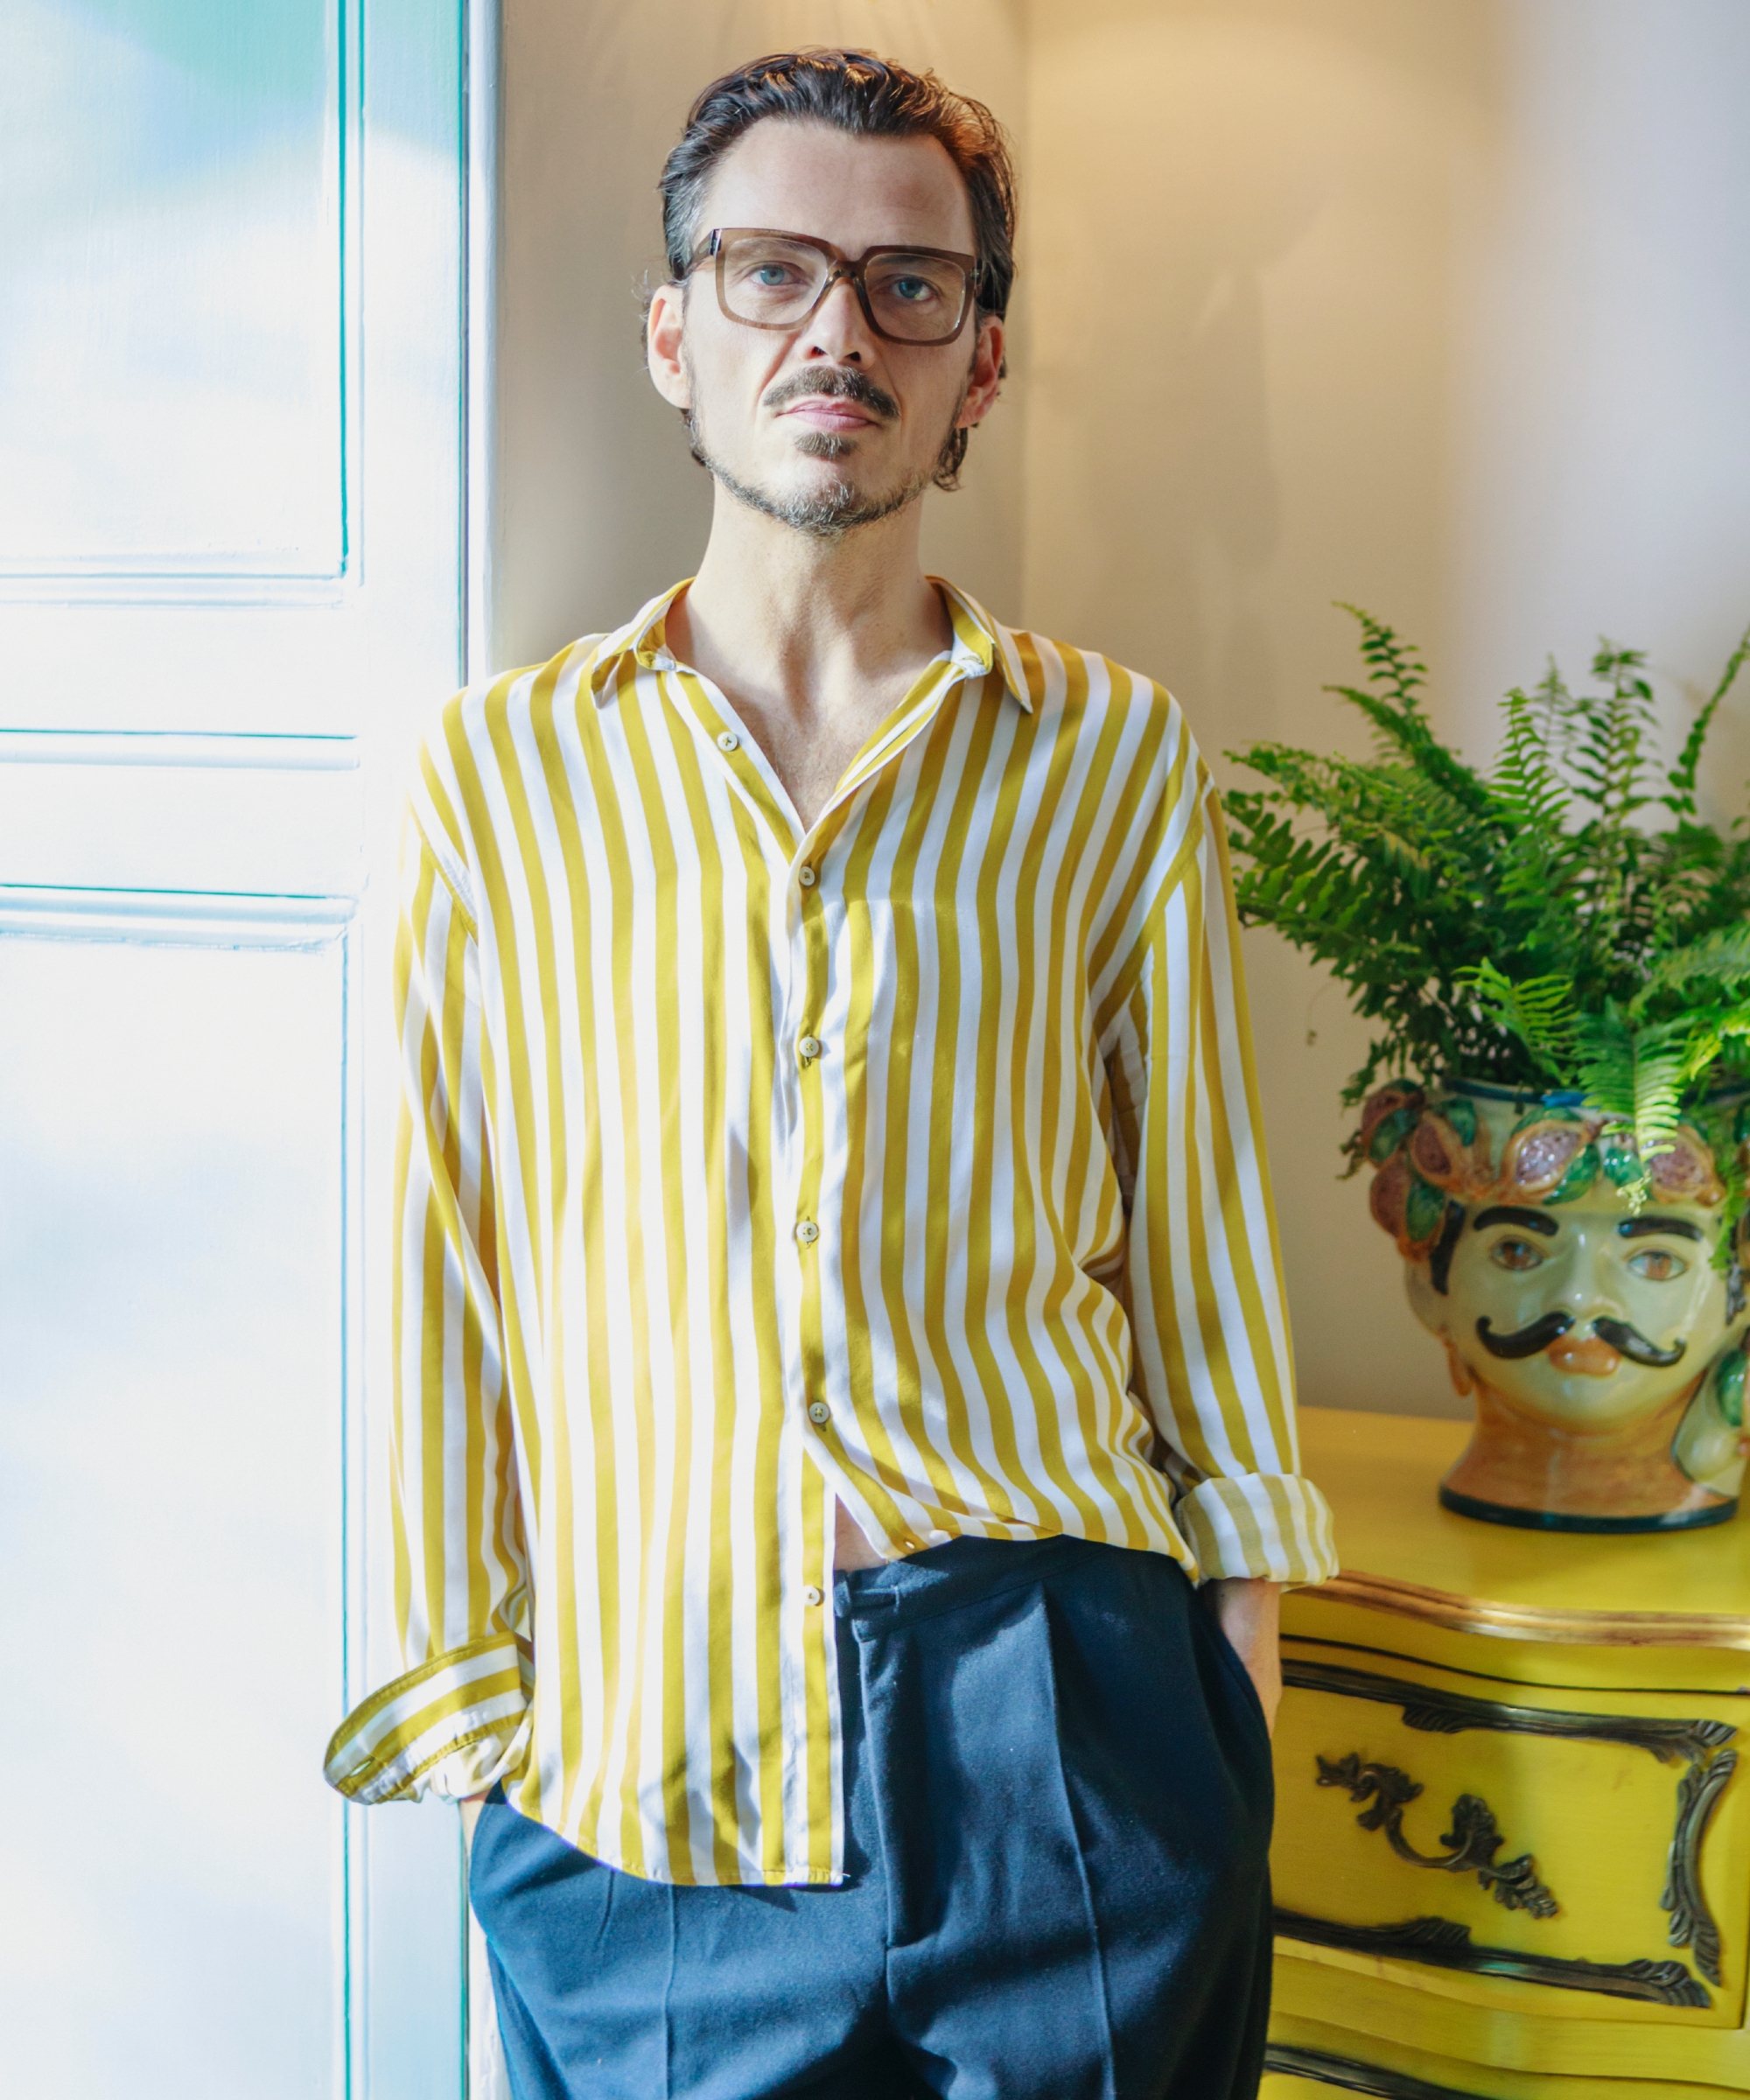 image of Matthew Williamson, global interior designer standing by a window wearing a yellow and white stripe shirt, blue trousers, standing in front of yellow console table